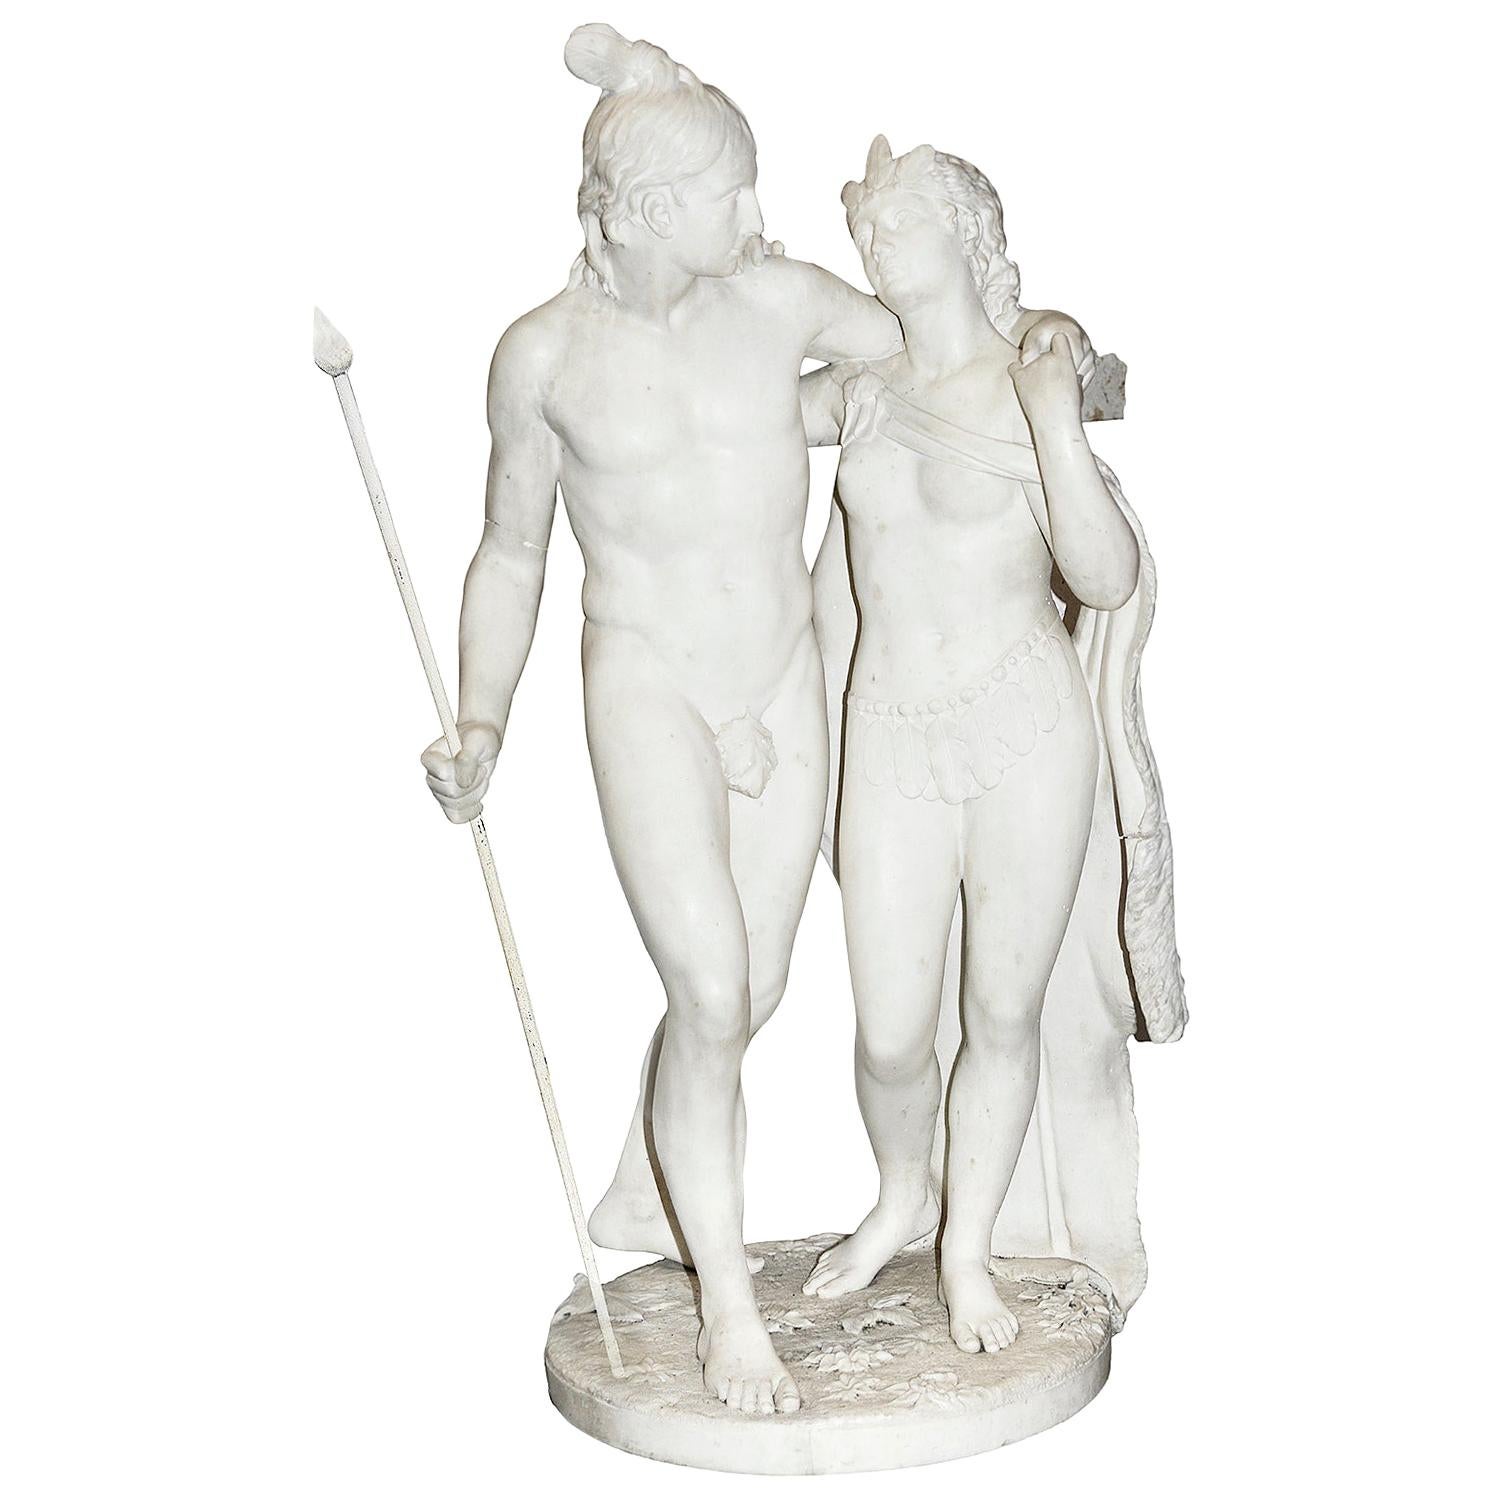 Larger 19th Century Marble Statue of Hiawatha and Minnehaha